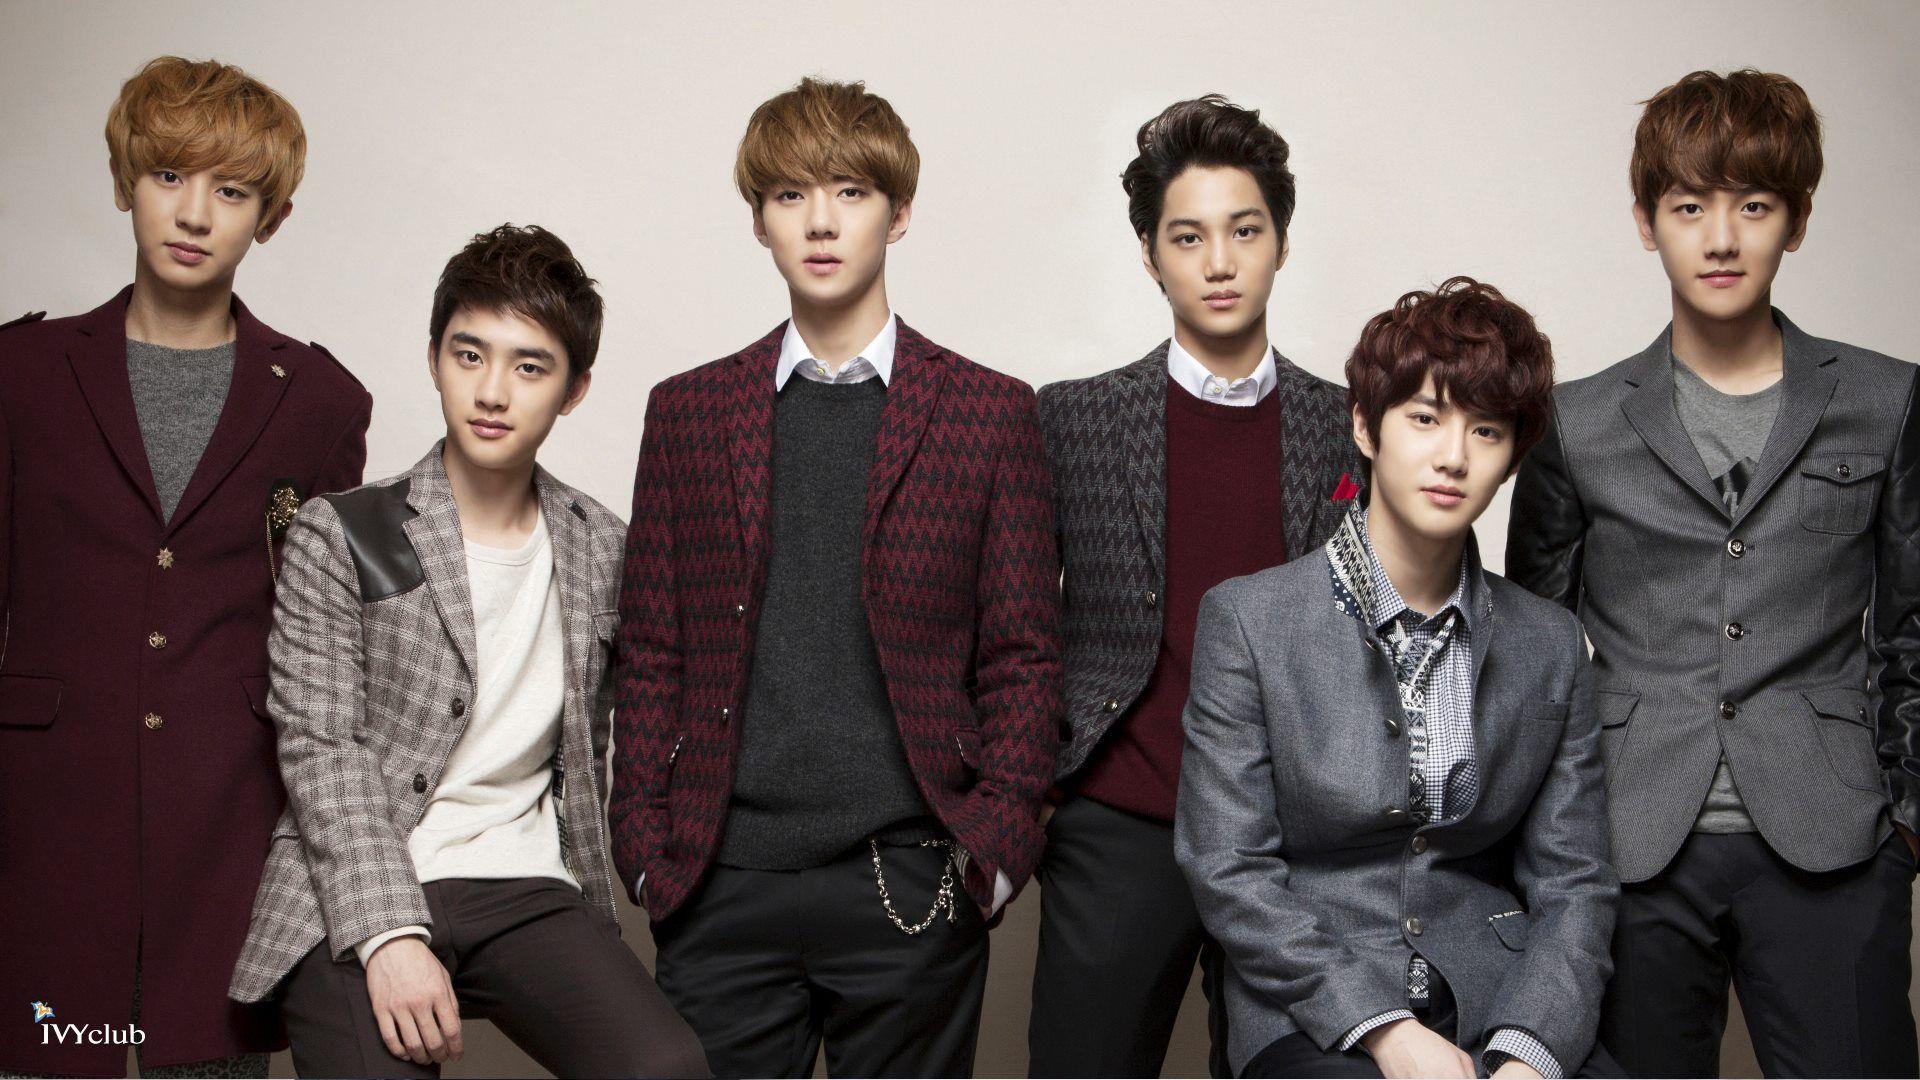 EXO K Ivy Club Official Site Update. EXO Planet. Exo